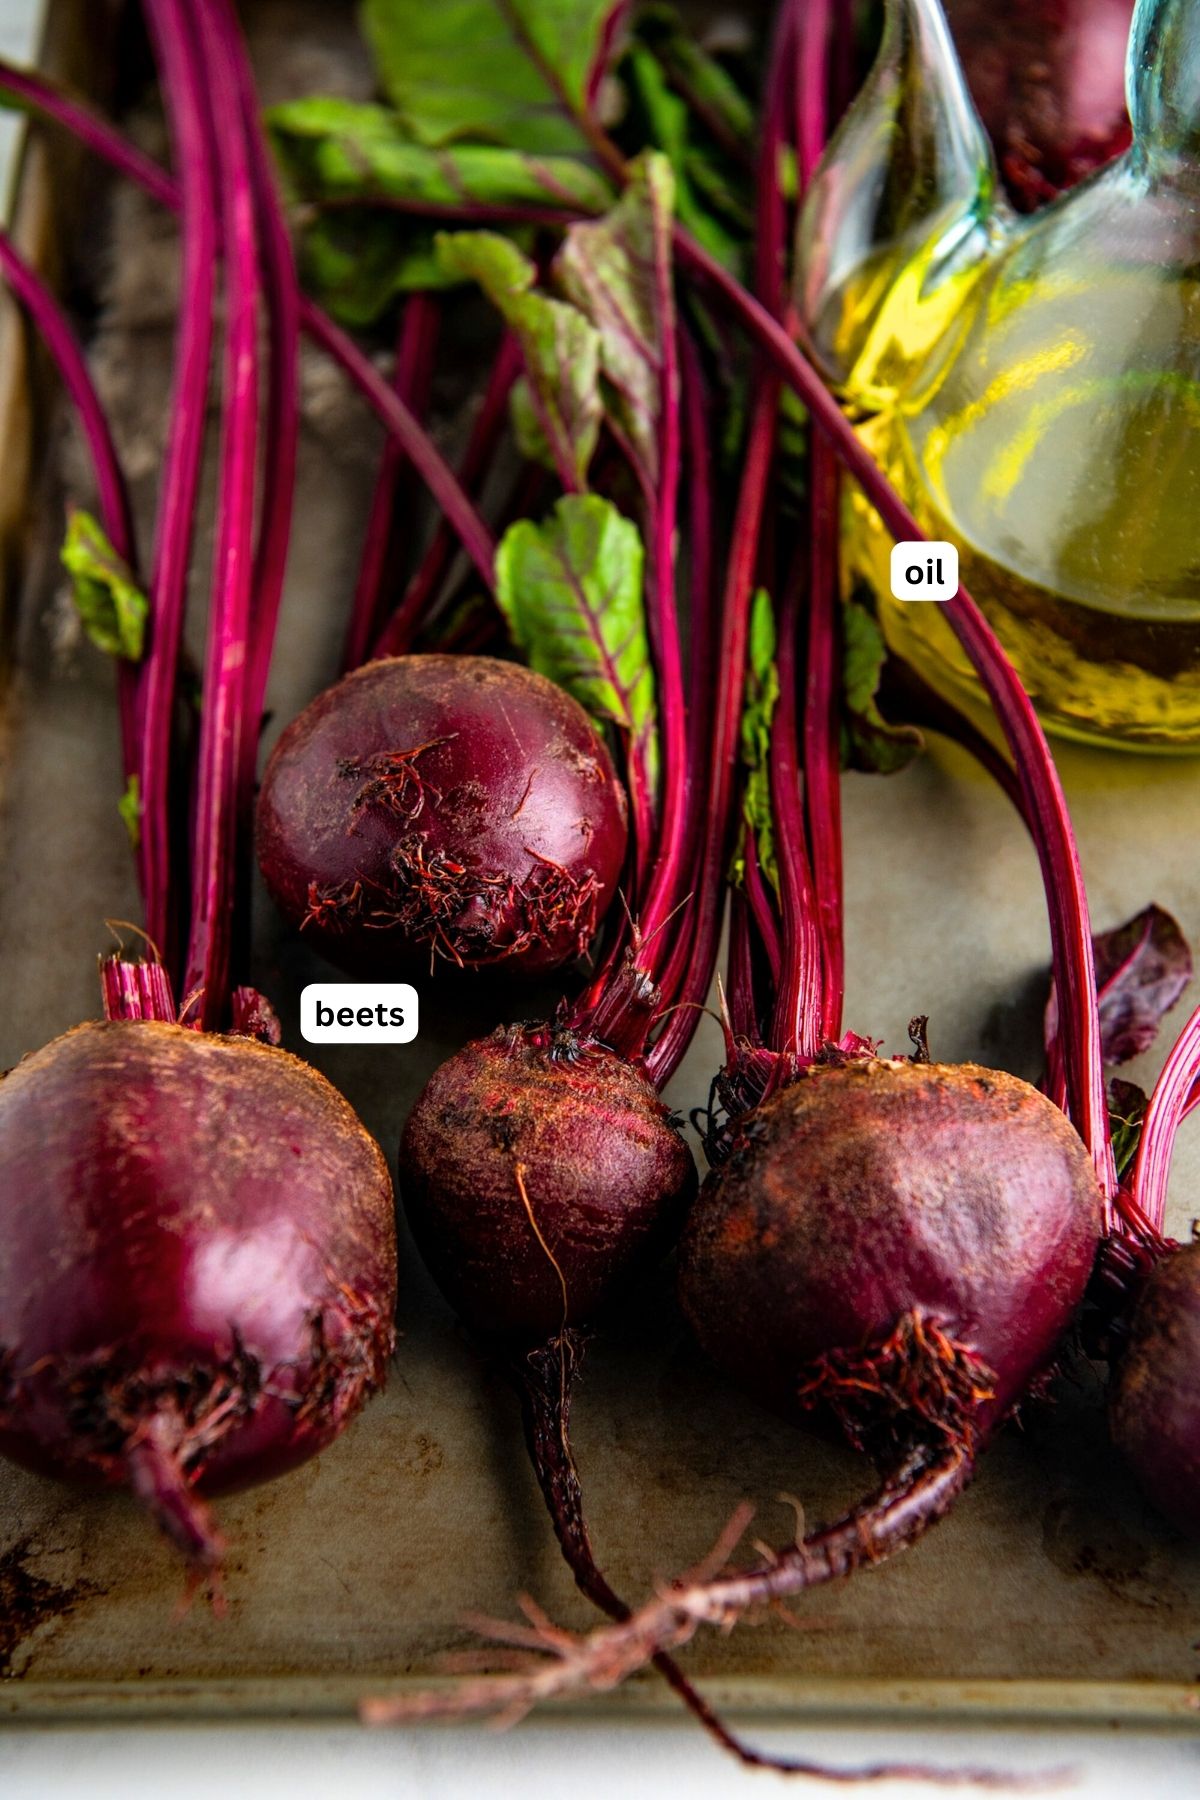 Whole beets on a cookie sheet with a bottle of olive oil on the side.